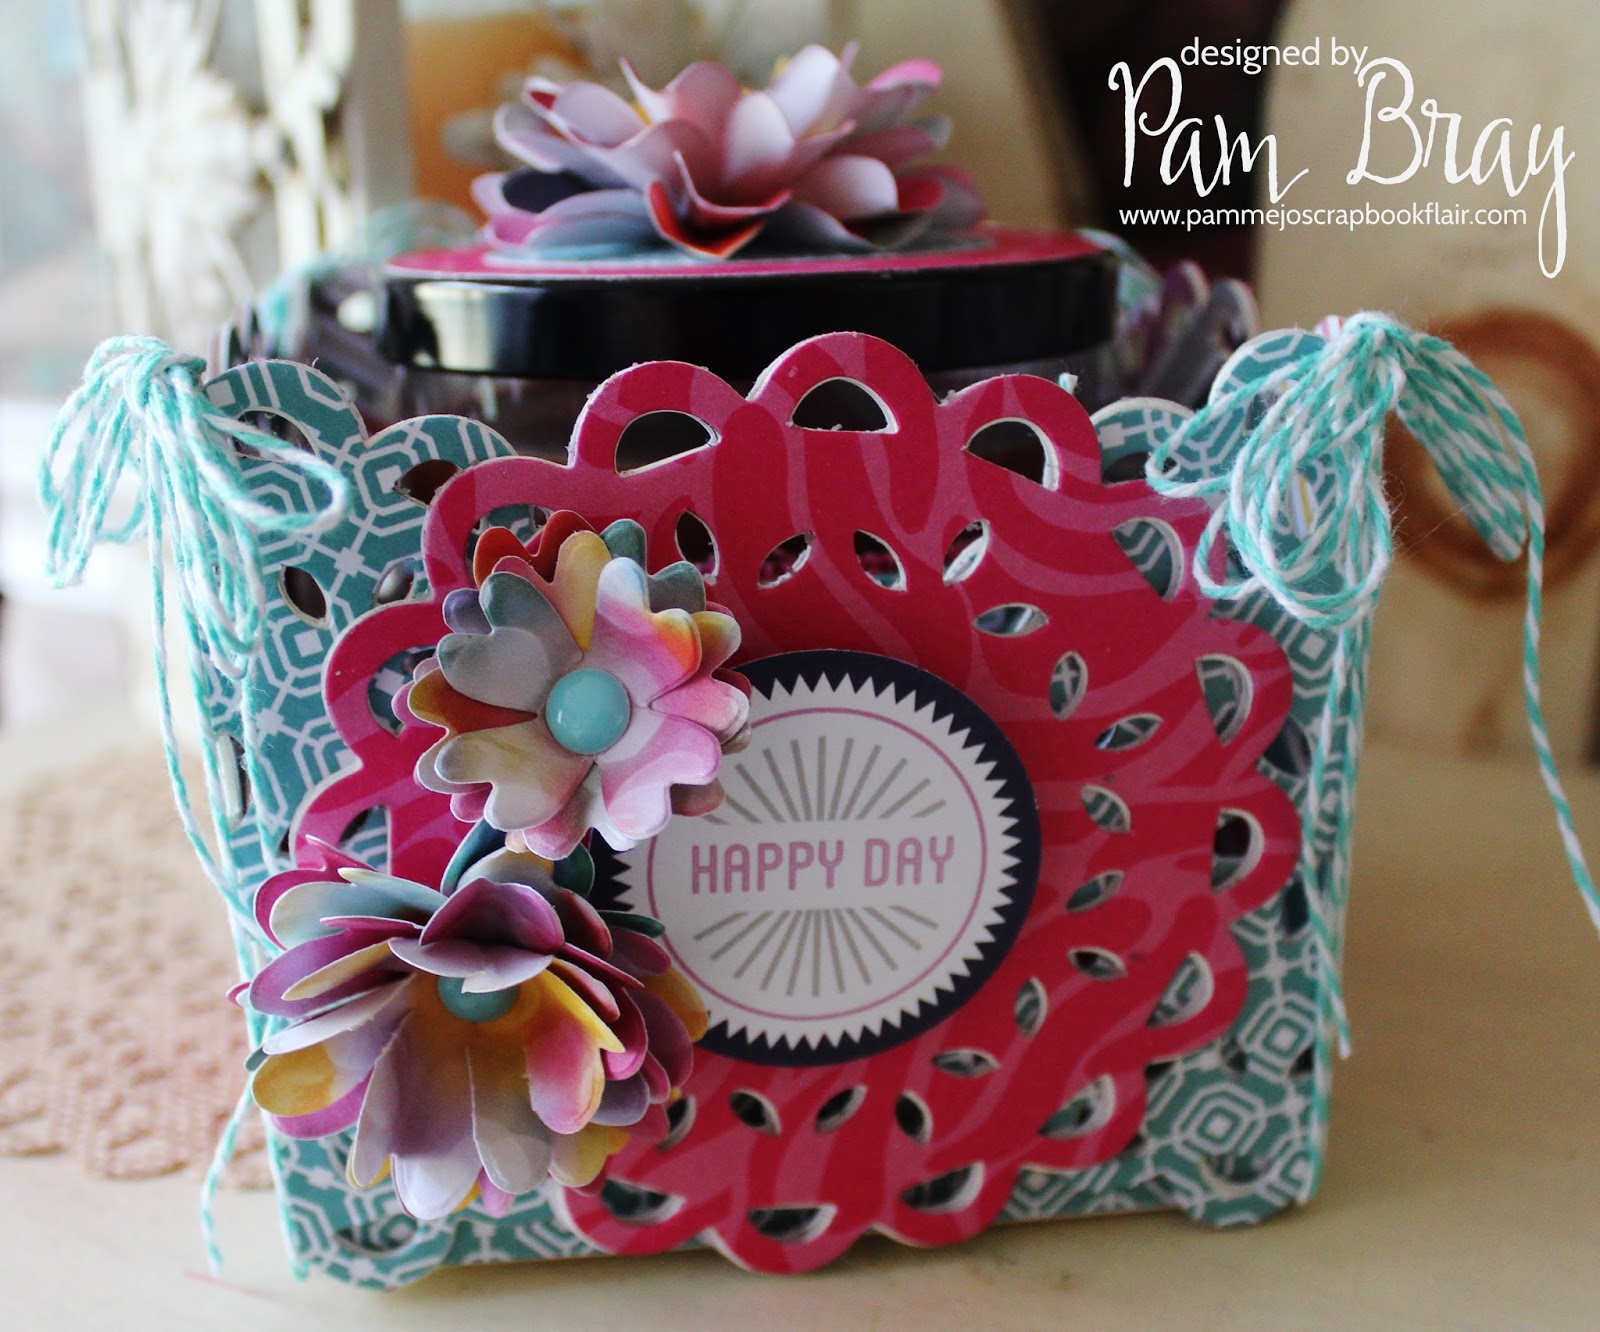 DIY MOTHER'S DAY GIFT  CANDLE & WRAPPING 